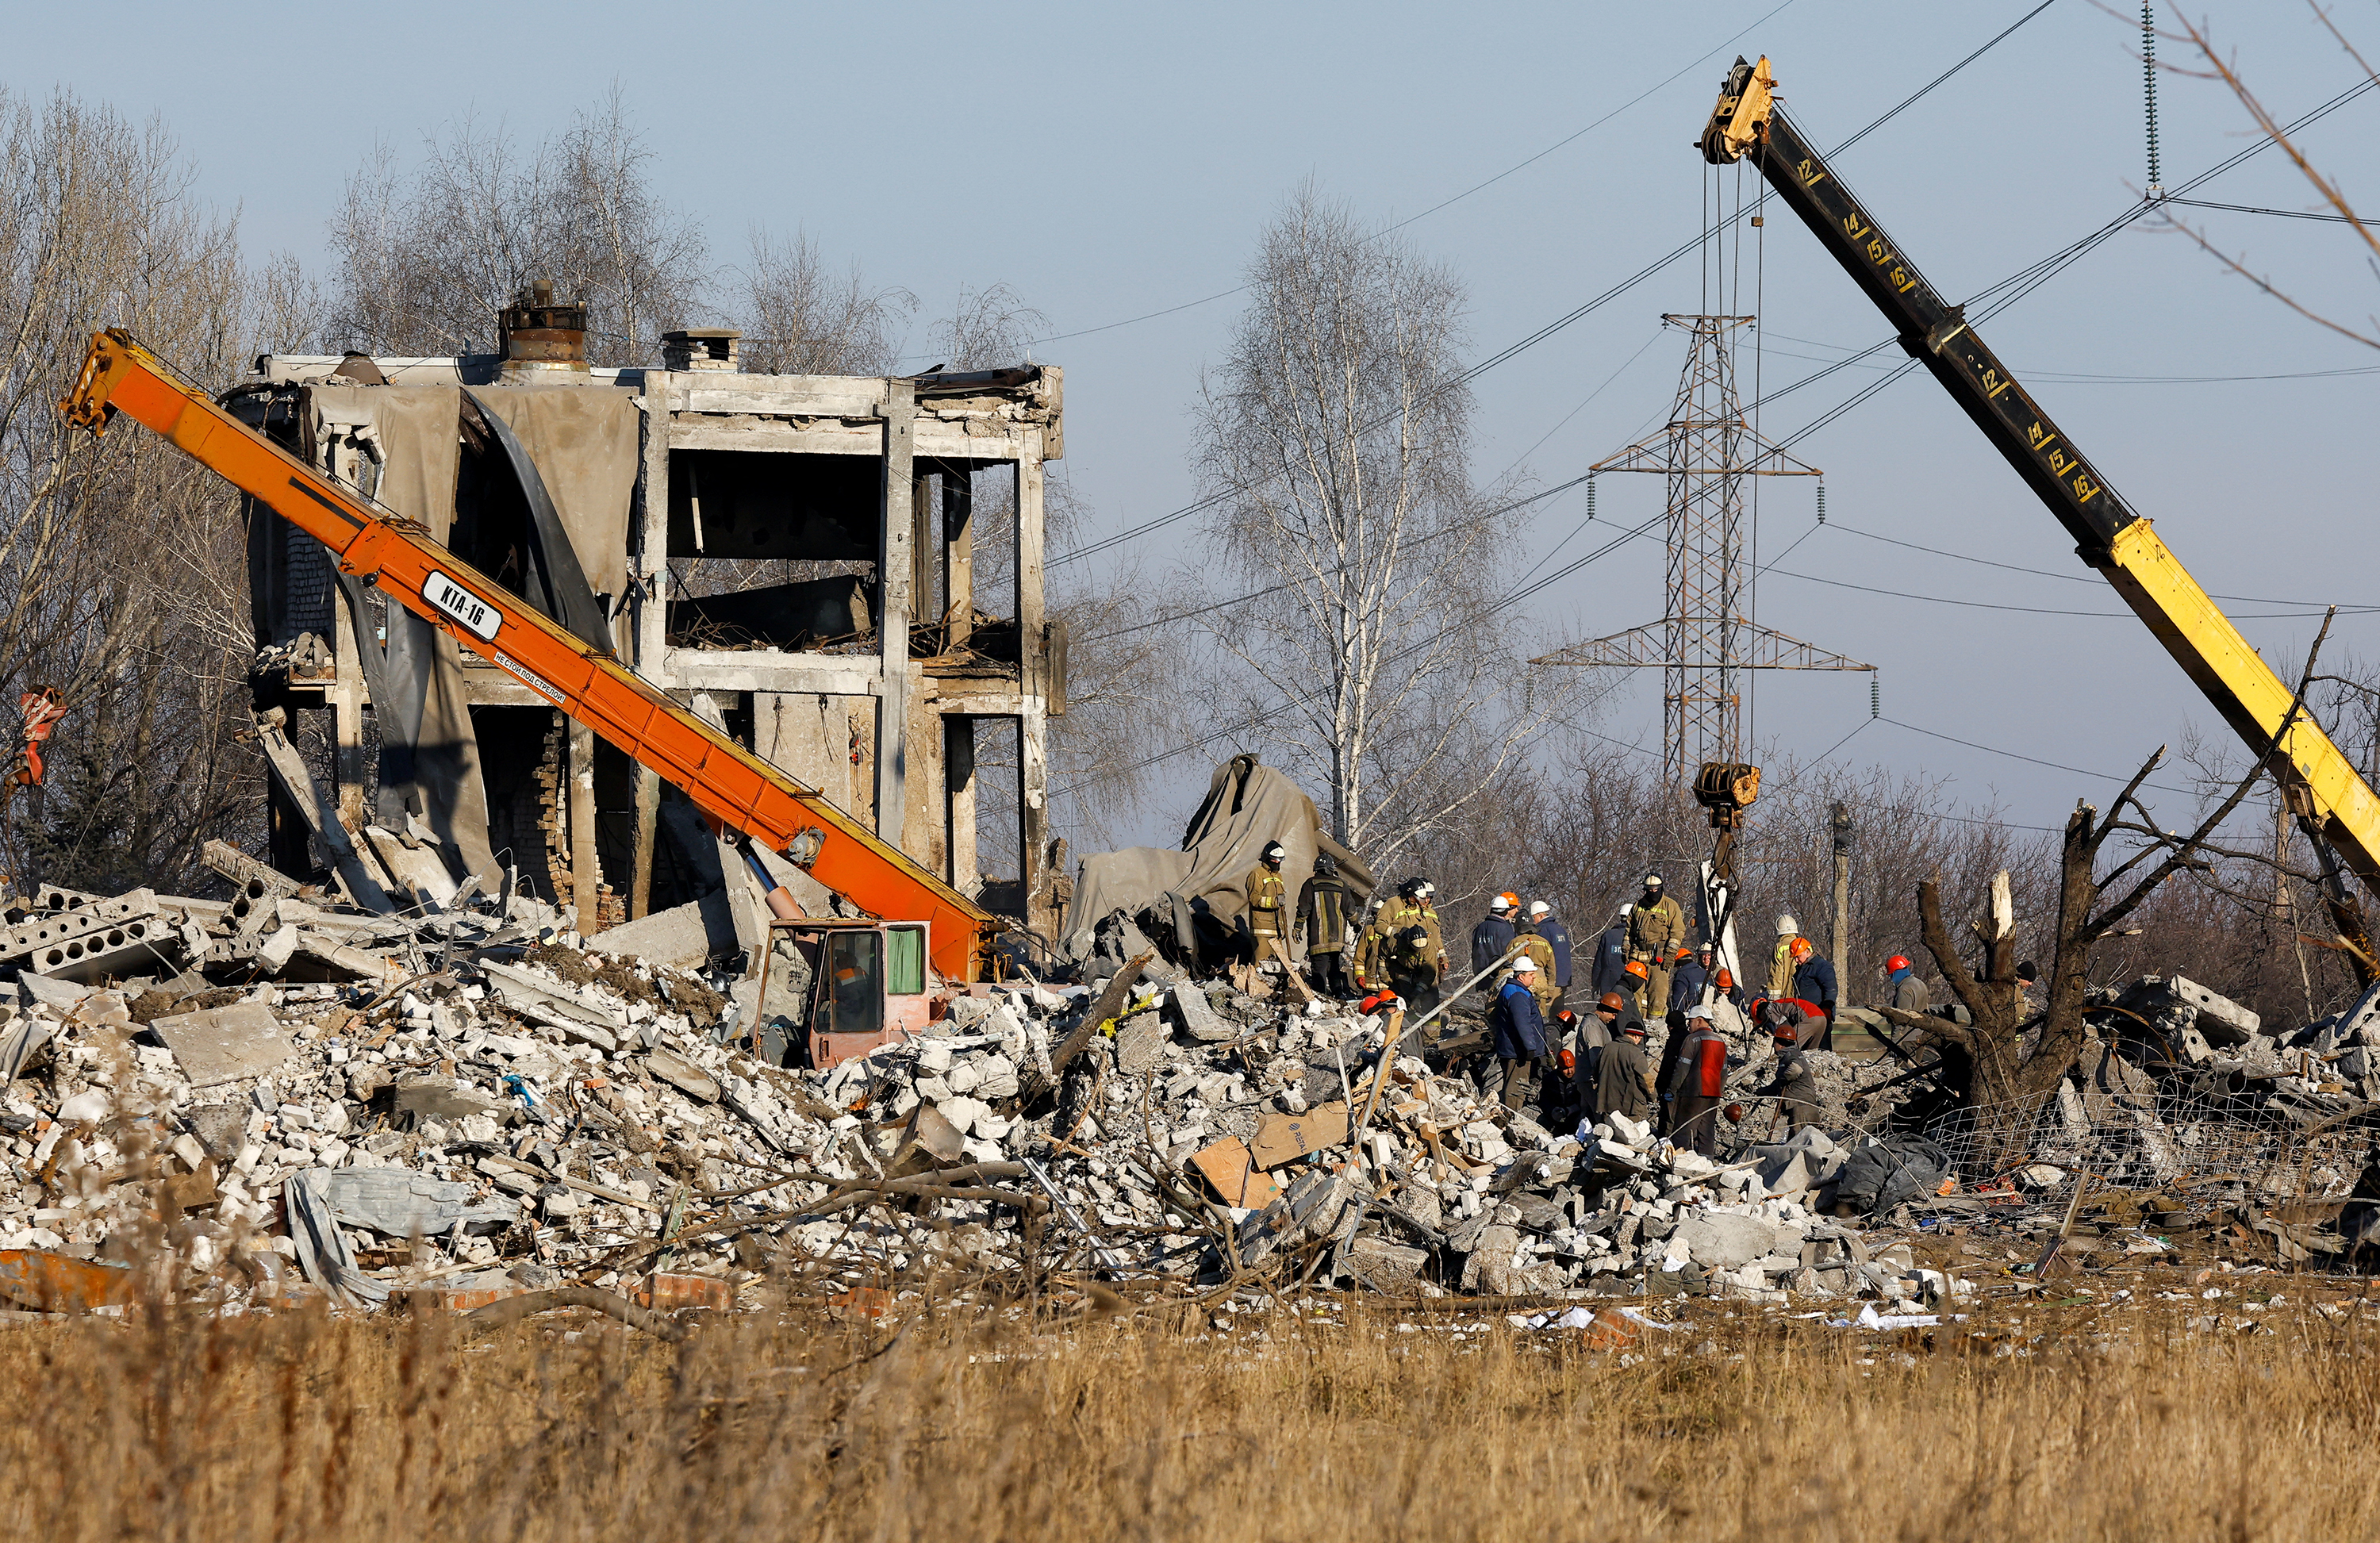 Workers and emergencies' ministry members remove debris of a destroyed building purported to be a vocational college used as temporary accommodation for Russian soldiers. 89 servicemen were killed in the strike in Makiivka on January 3 as stated by the Russian Defense Ministry.